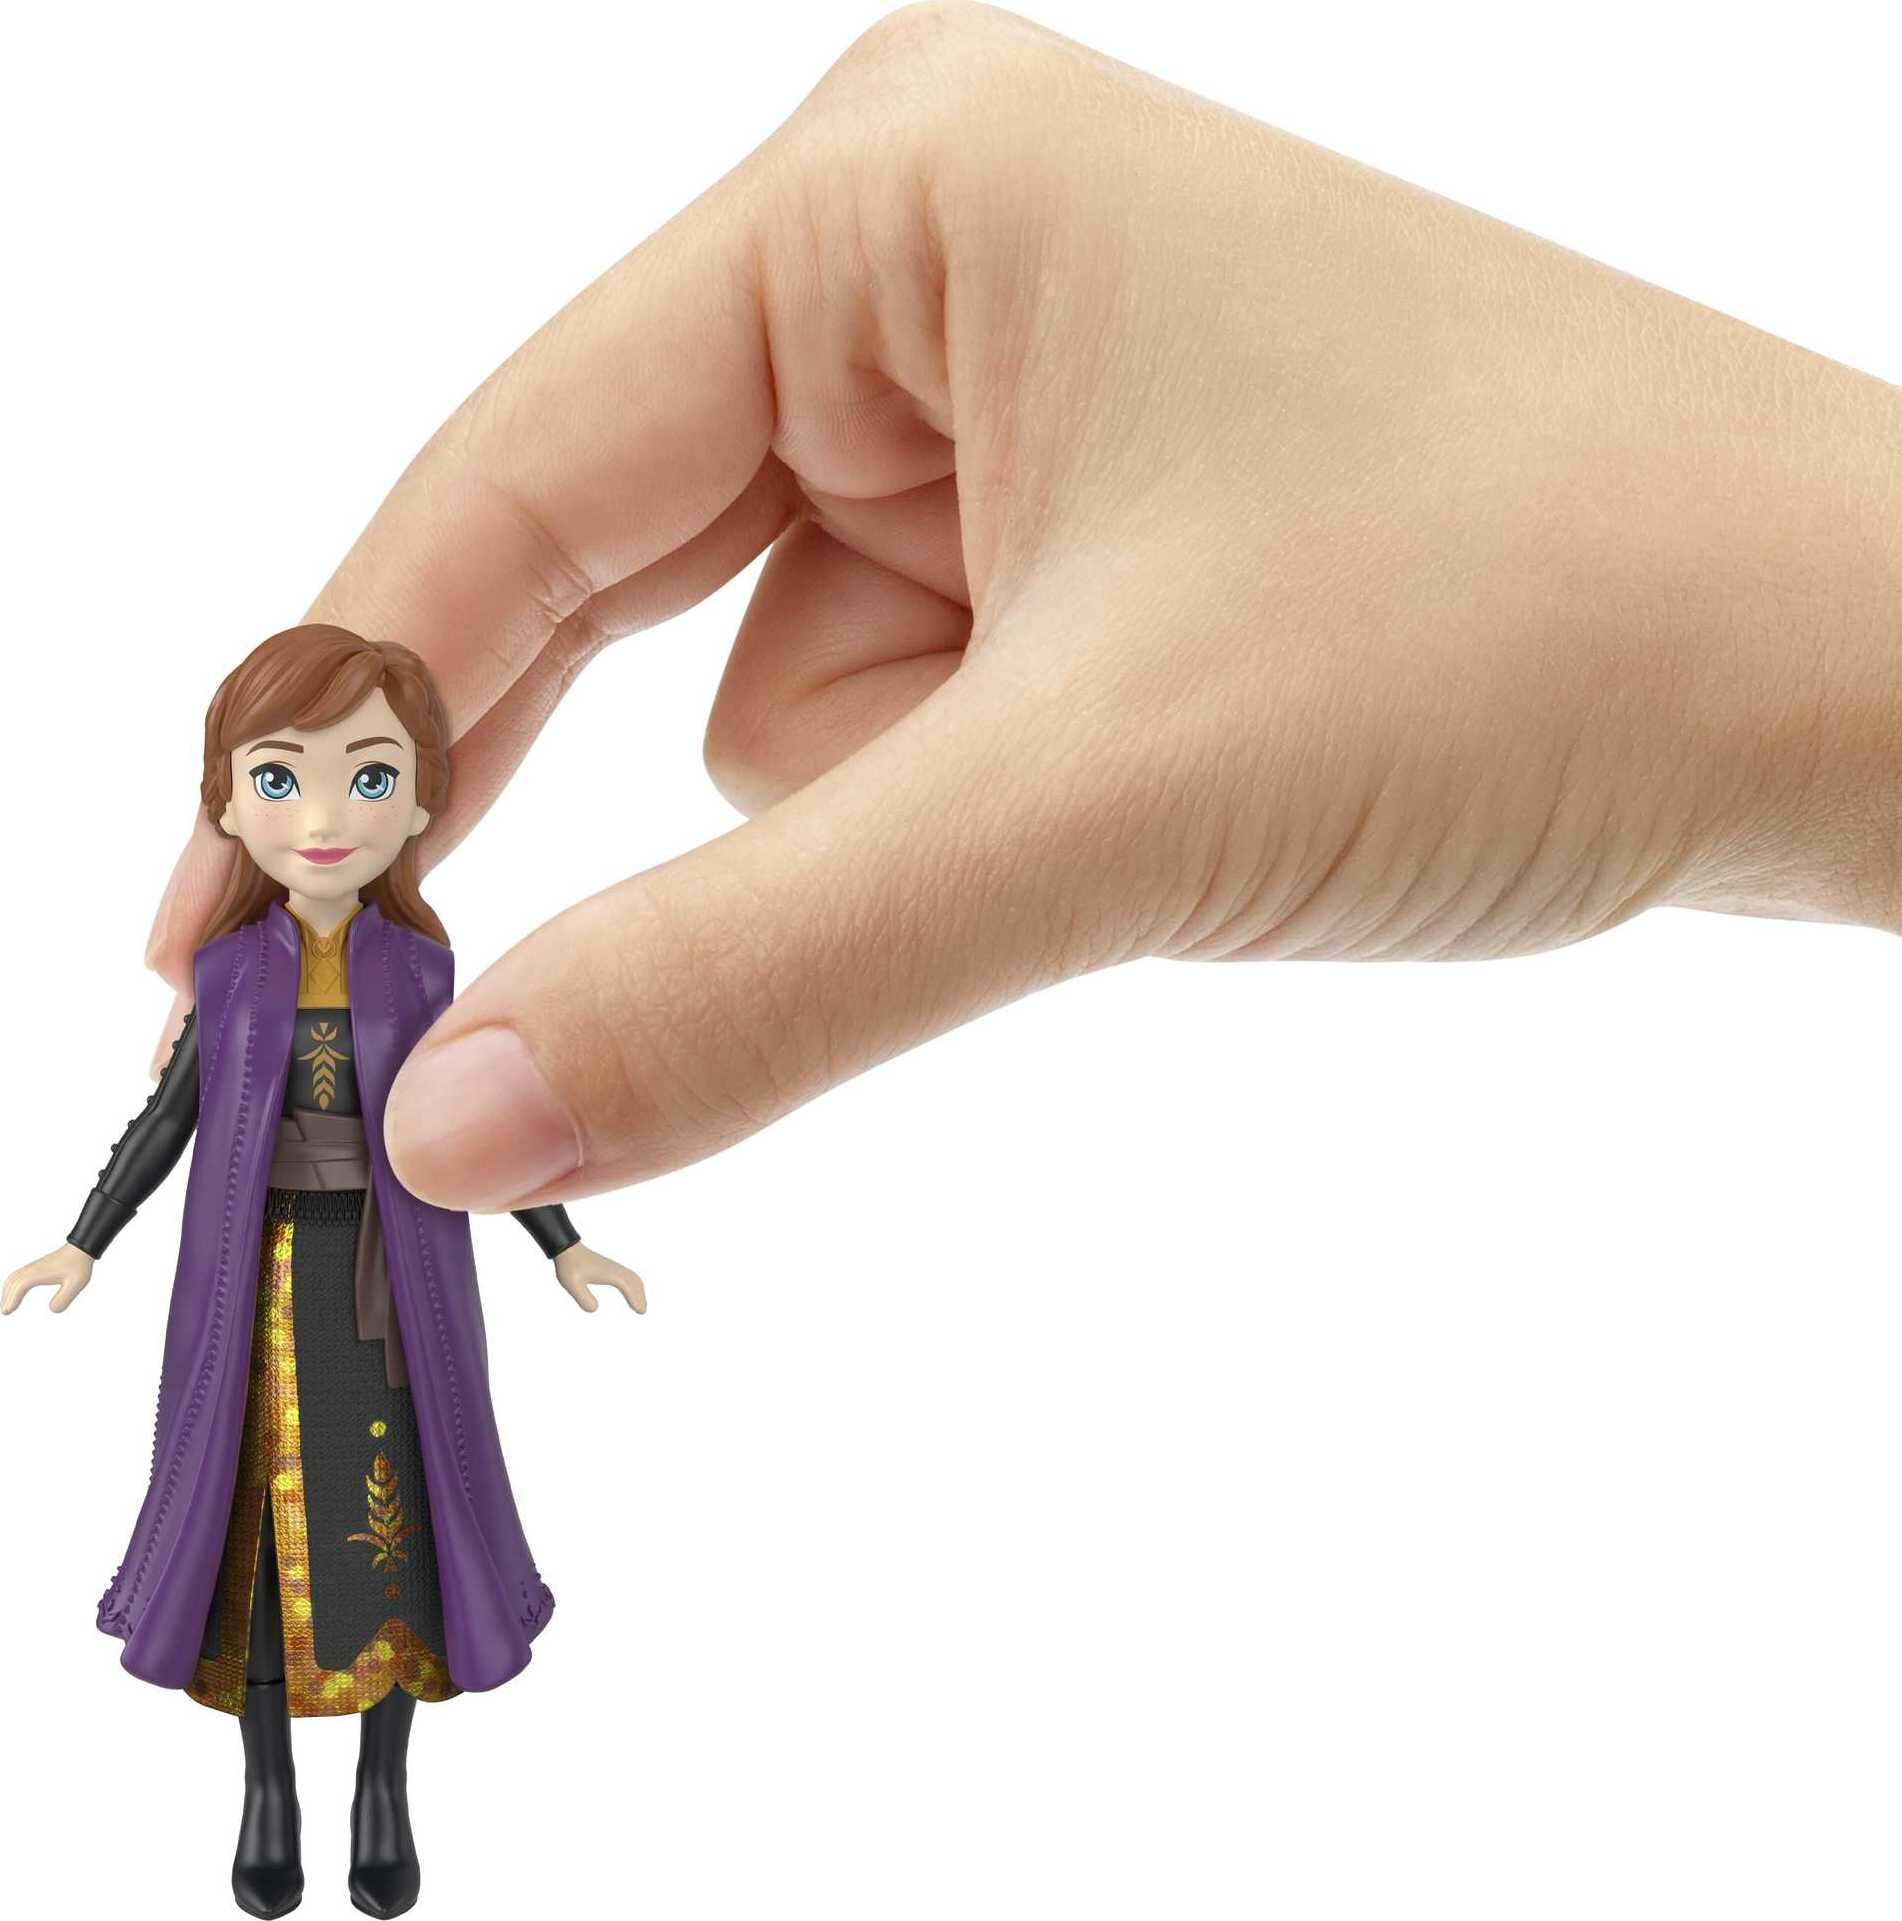 Disney Frozen Anna Small Doll in Travel Look, Posable with Removable Cape & Skirt - image 2 of 6